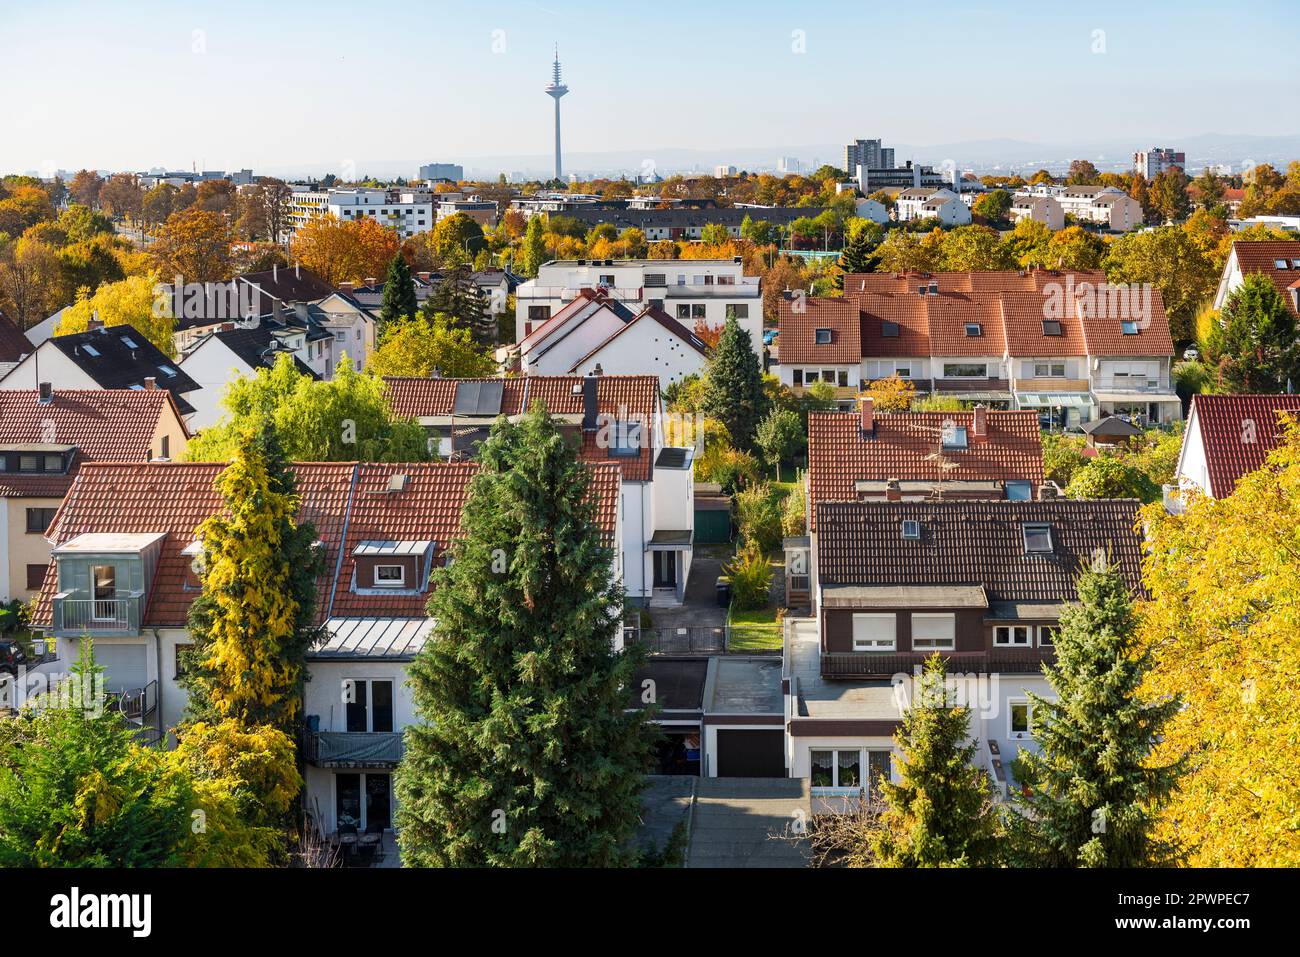 Idyllic residential area with single family row houses in Frankfurt am Main with autumn colored trees Stock Photo